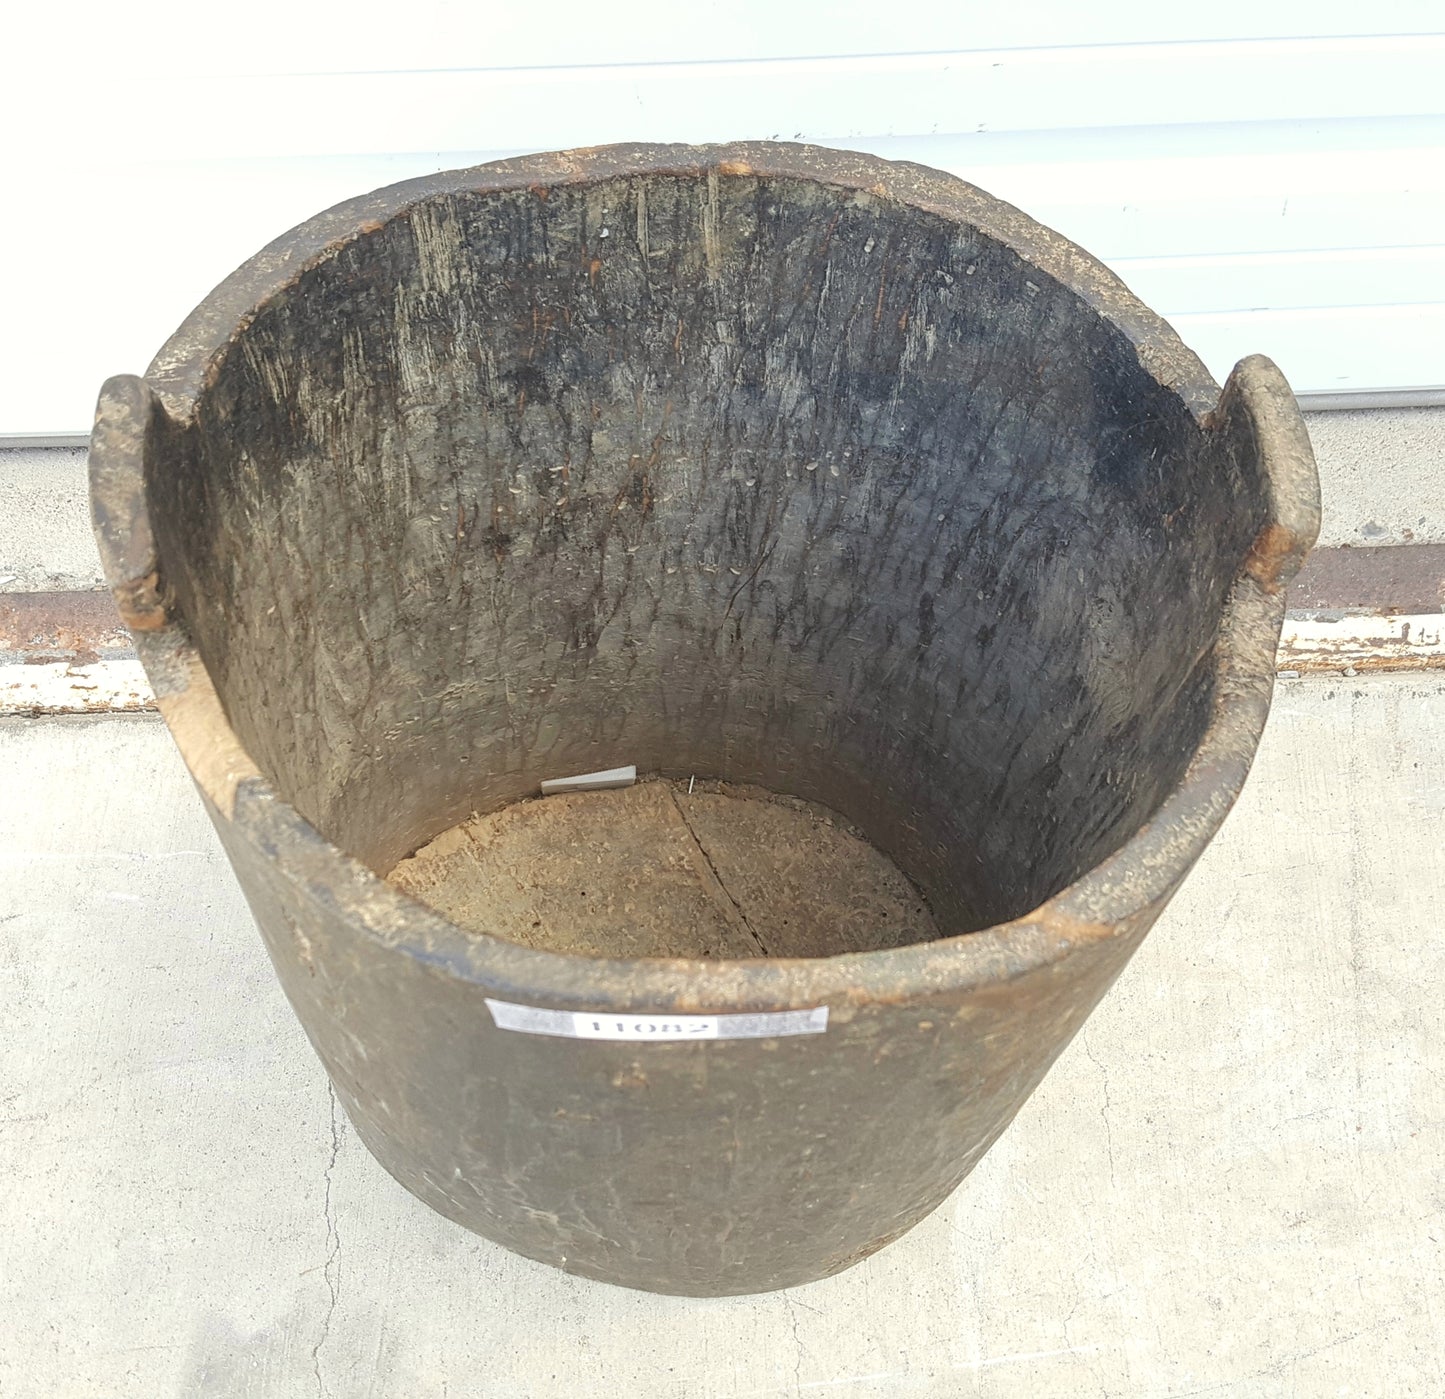 Small Salvaged Hornbeam Container Repurposed as Planter / Trashcan